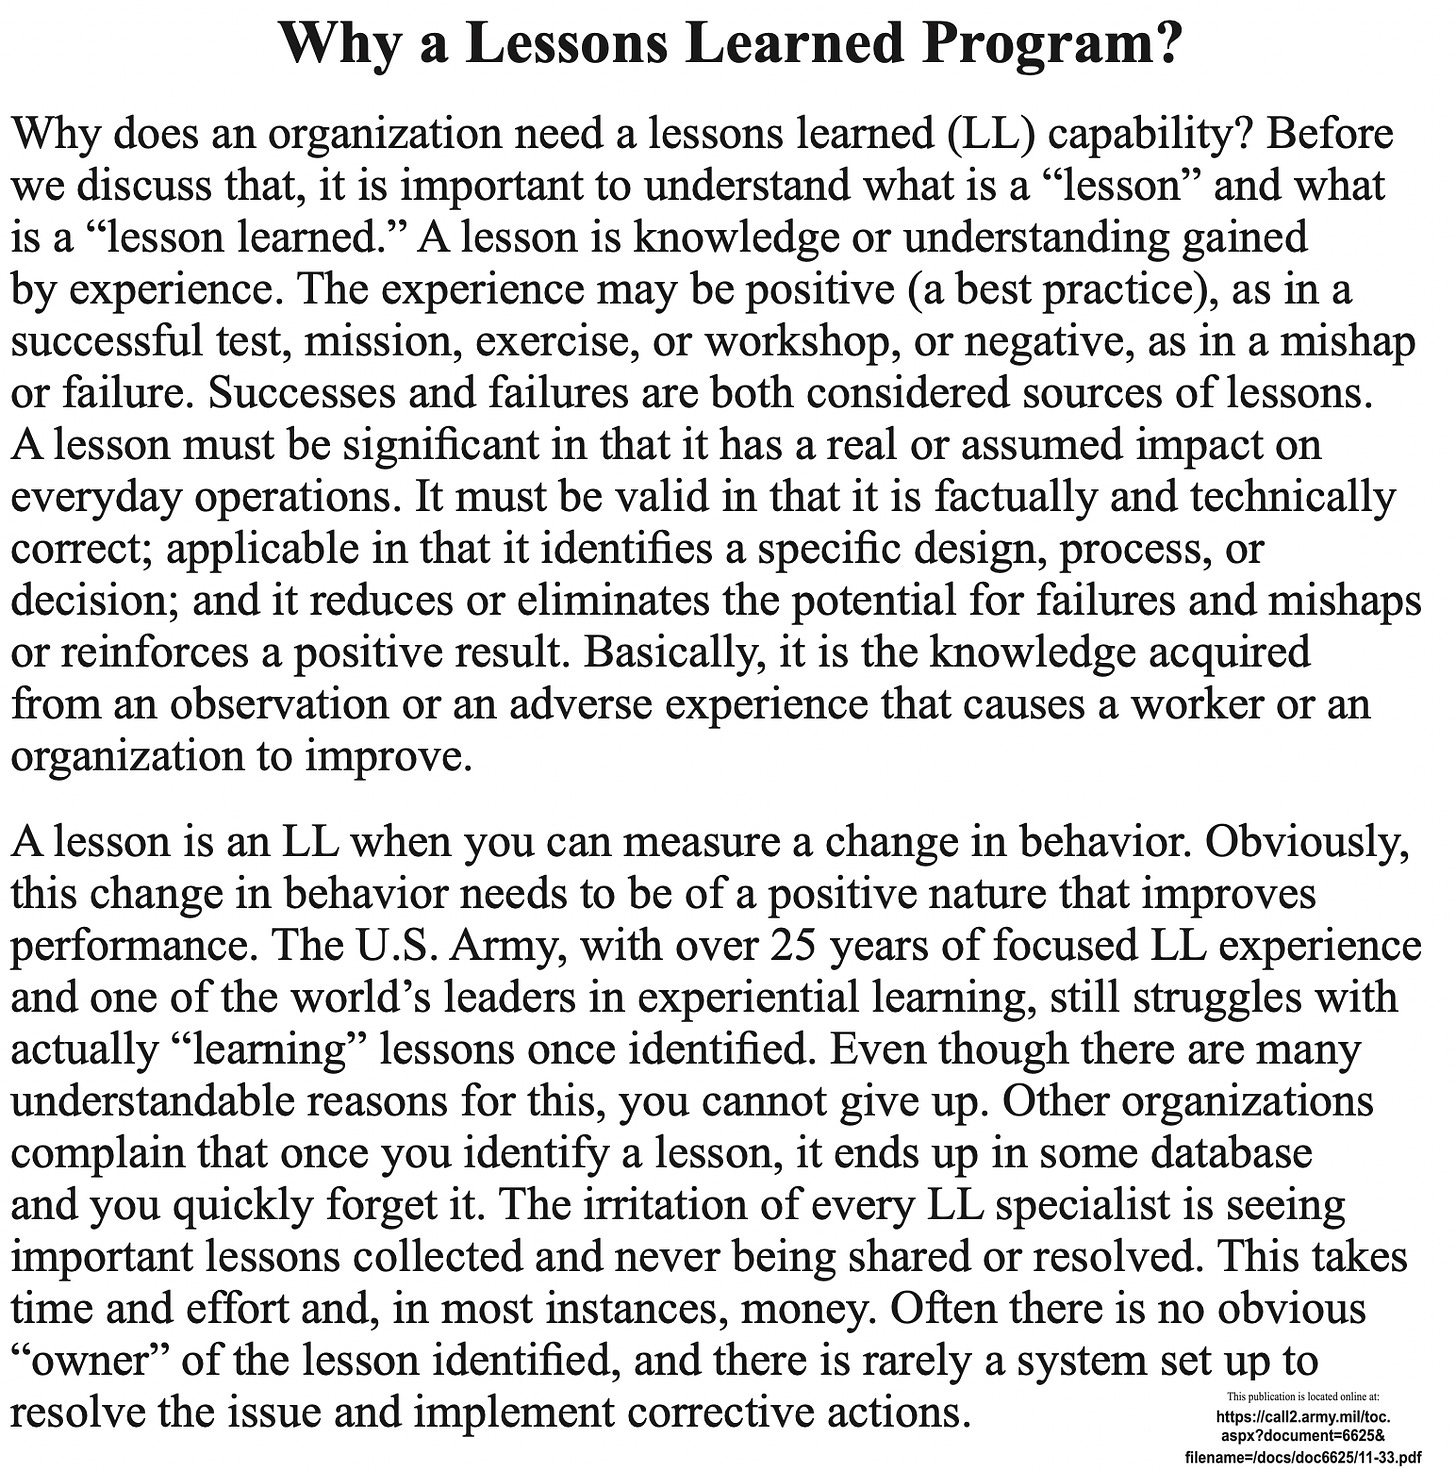 Why a Lessons Learned Program? Why does an organization need a lessons learned (LL) capability? Before we discuss that, it is important to understand what is a lesson" and what is a "lesson learned." A lesson is knowledge or understanding gained by experience. The experience may be positive (a best practice), as in a successful test, mission, exercise, or workshop, or negative, as in a mishap or failure. Successes and failures are both considered sources of lessons. A lesson must be significant in that it has a real or assumed impact on everyday operations. It must be valid in that it is factually and technically correct; applicable in that it identifies a specific design, process, or decision; and it reduces or eliminates the potential for failures and mishaps or reinforces a positive result. Basically, it is the knowledge acquired from an observation or an adverse experience that causes a worker or an organization to improve. A lesson is an LL when you can measure a change in behavior. Obviously, this change in behavior needs to be of a positive nature that improves performance. The U.S. Army, with over 25 years of focused LL experience and one of the world's leaders in experiential learning, still struggles with actually "learning" lessons once identified. Even though there are many understandable reasons for this, you cannot give up. Other organizations complain that once you identify a lesson, it ends up in some database and you quickly forget it. The irritation of every LL specialist is seeing important lessons collected and never being shared or resolved. This takes time and effort and, in most instances, money. Often there is no obvious "owner" of the lesson identified, and there is rarely a system set up to resolve the issue and implement corrective actions.